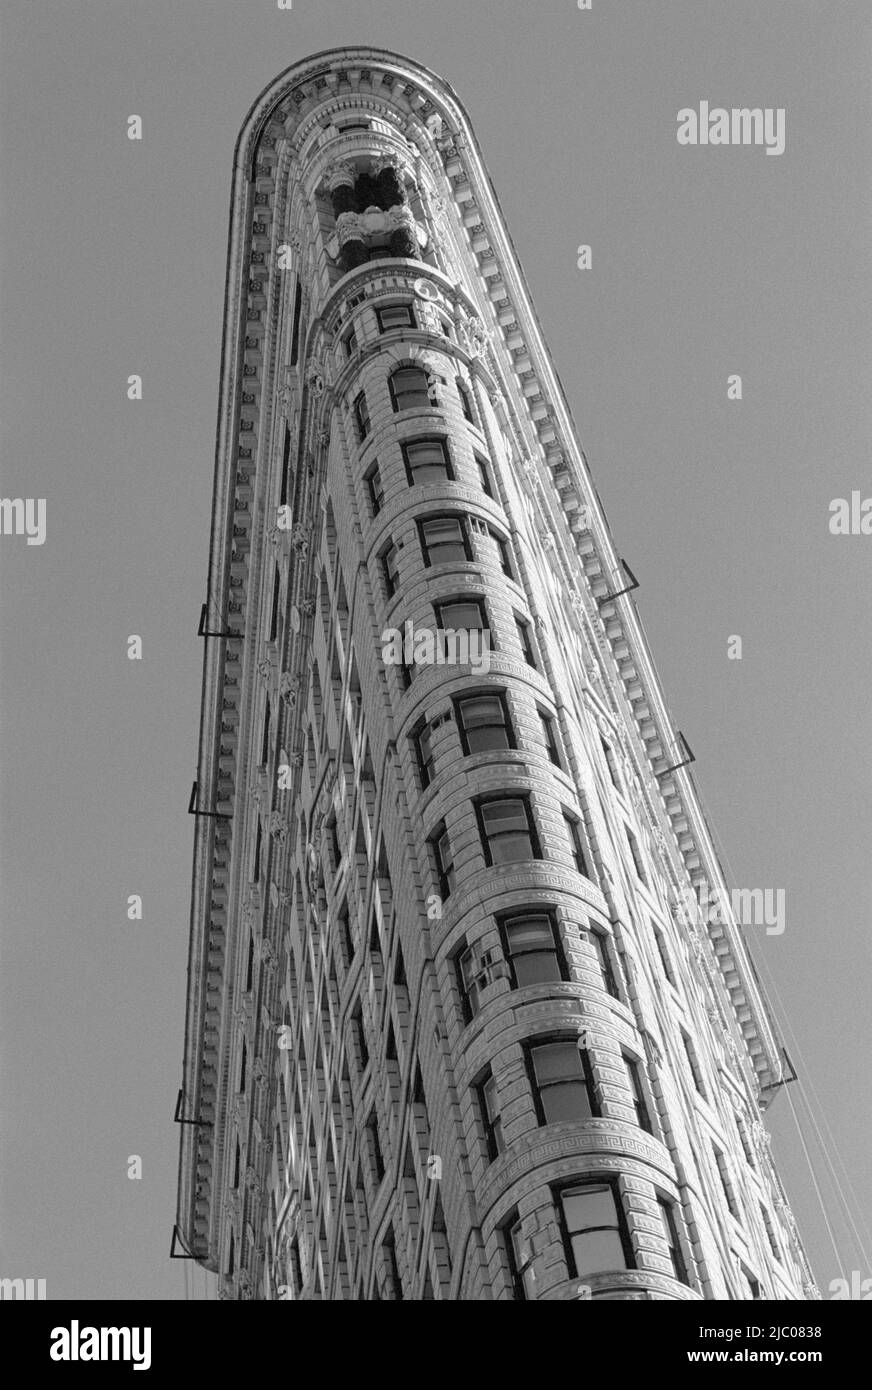 Low angle view of the Flatiron Building built in 1902, Manhattan, New York City, New York State, USA Stock Photo